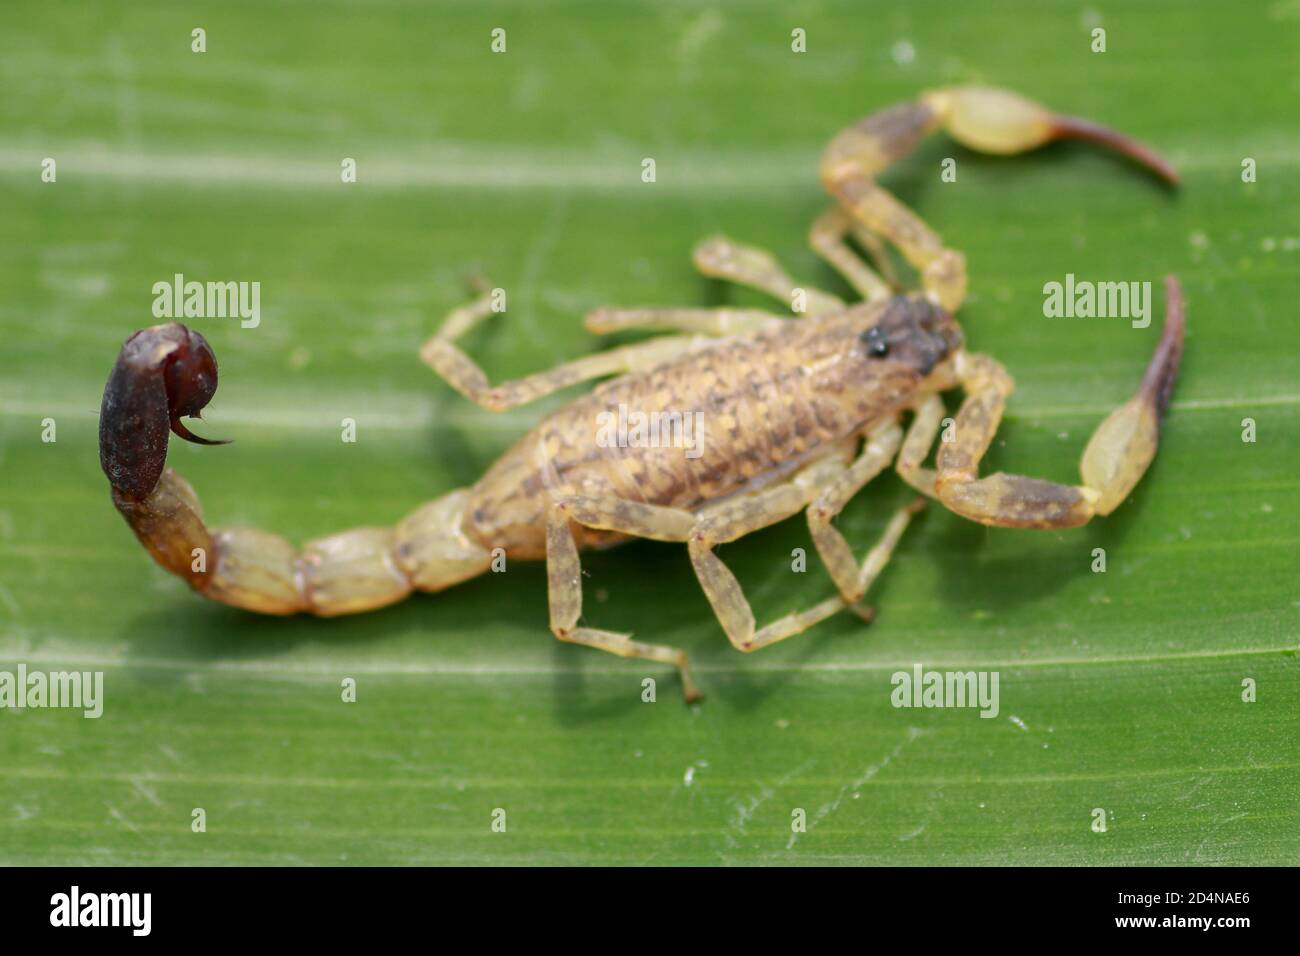 Top view of Deathstalker on green leaf in nature. Leiurus quinquestriatus is a species of scorpion, a member of the Buthidae family. It is also known Stock Photo